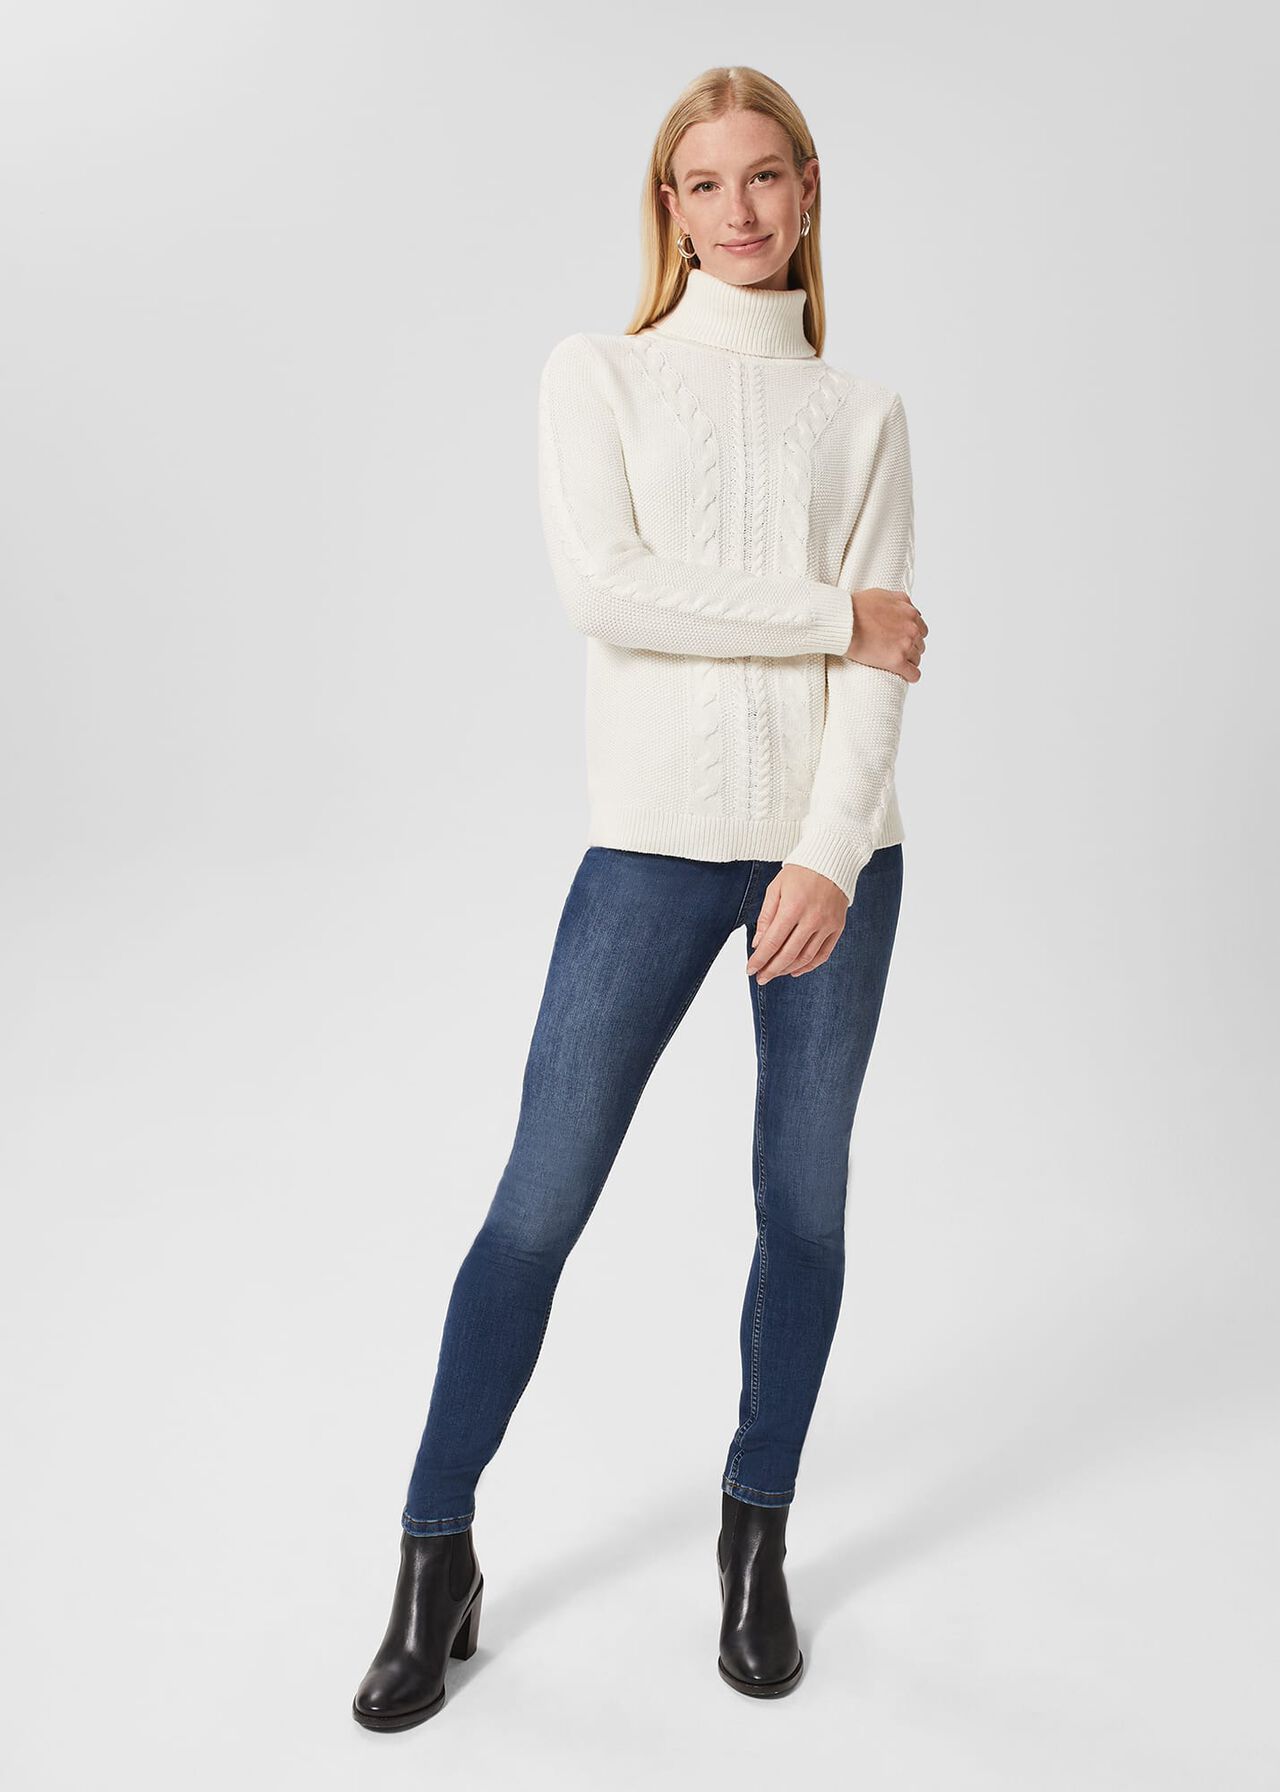 Nora Cable Sweater, Ivory, hi-res